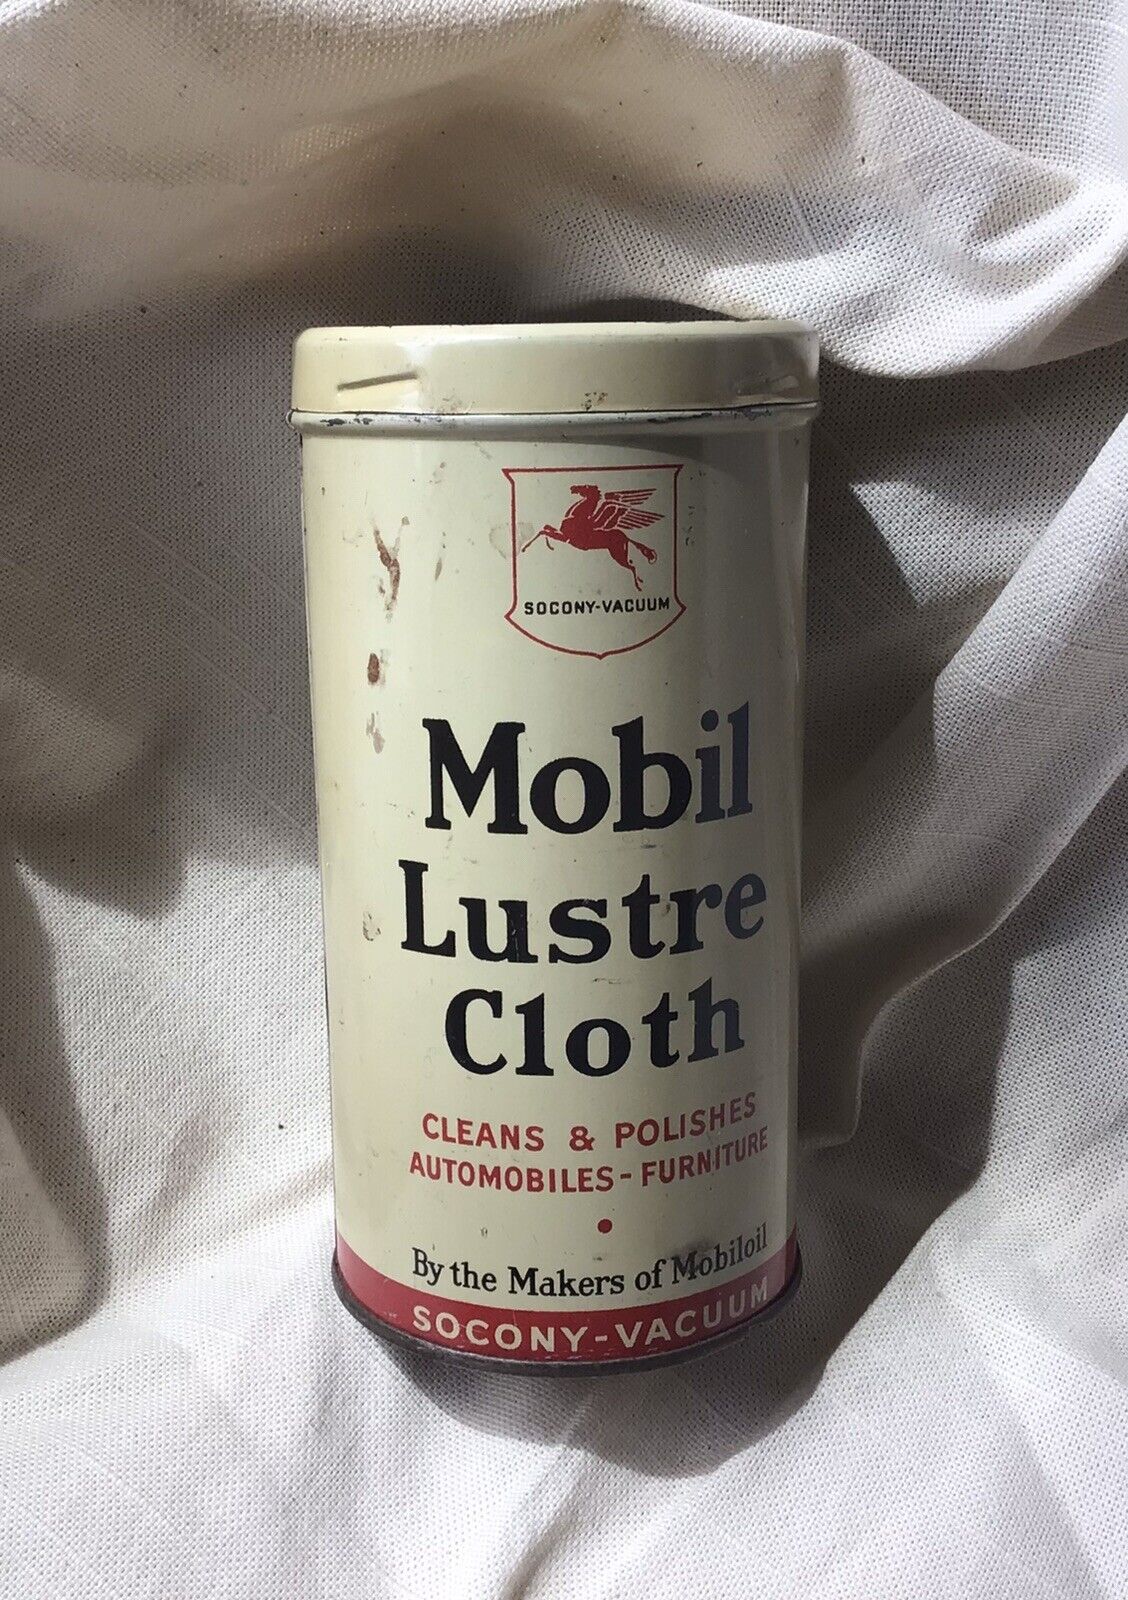 Mobil Lustre Cloth Tin Can - Socony Vacuum Oil Co - Canister -1940s - Pegasus